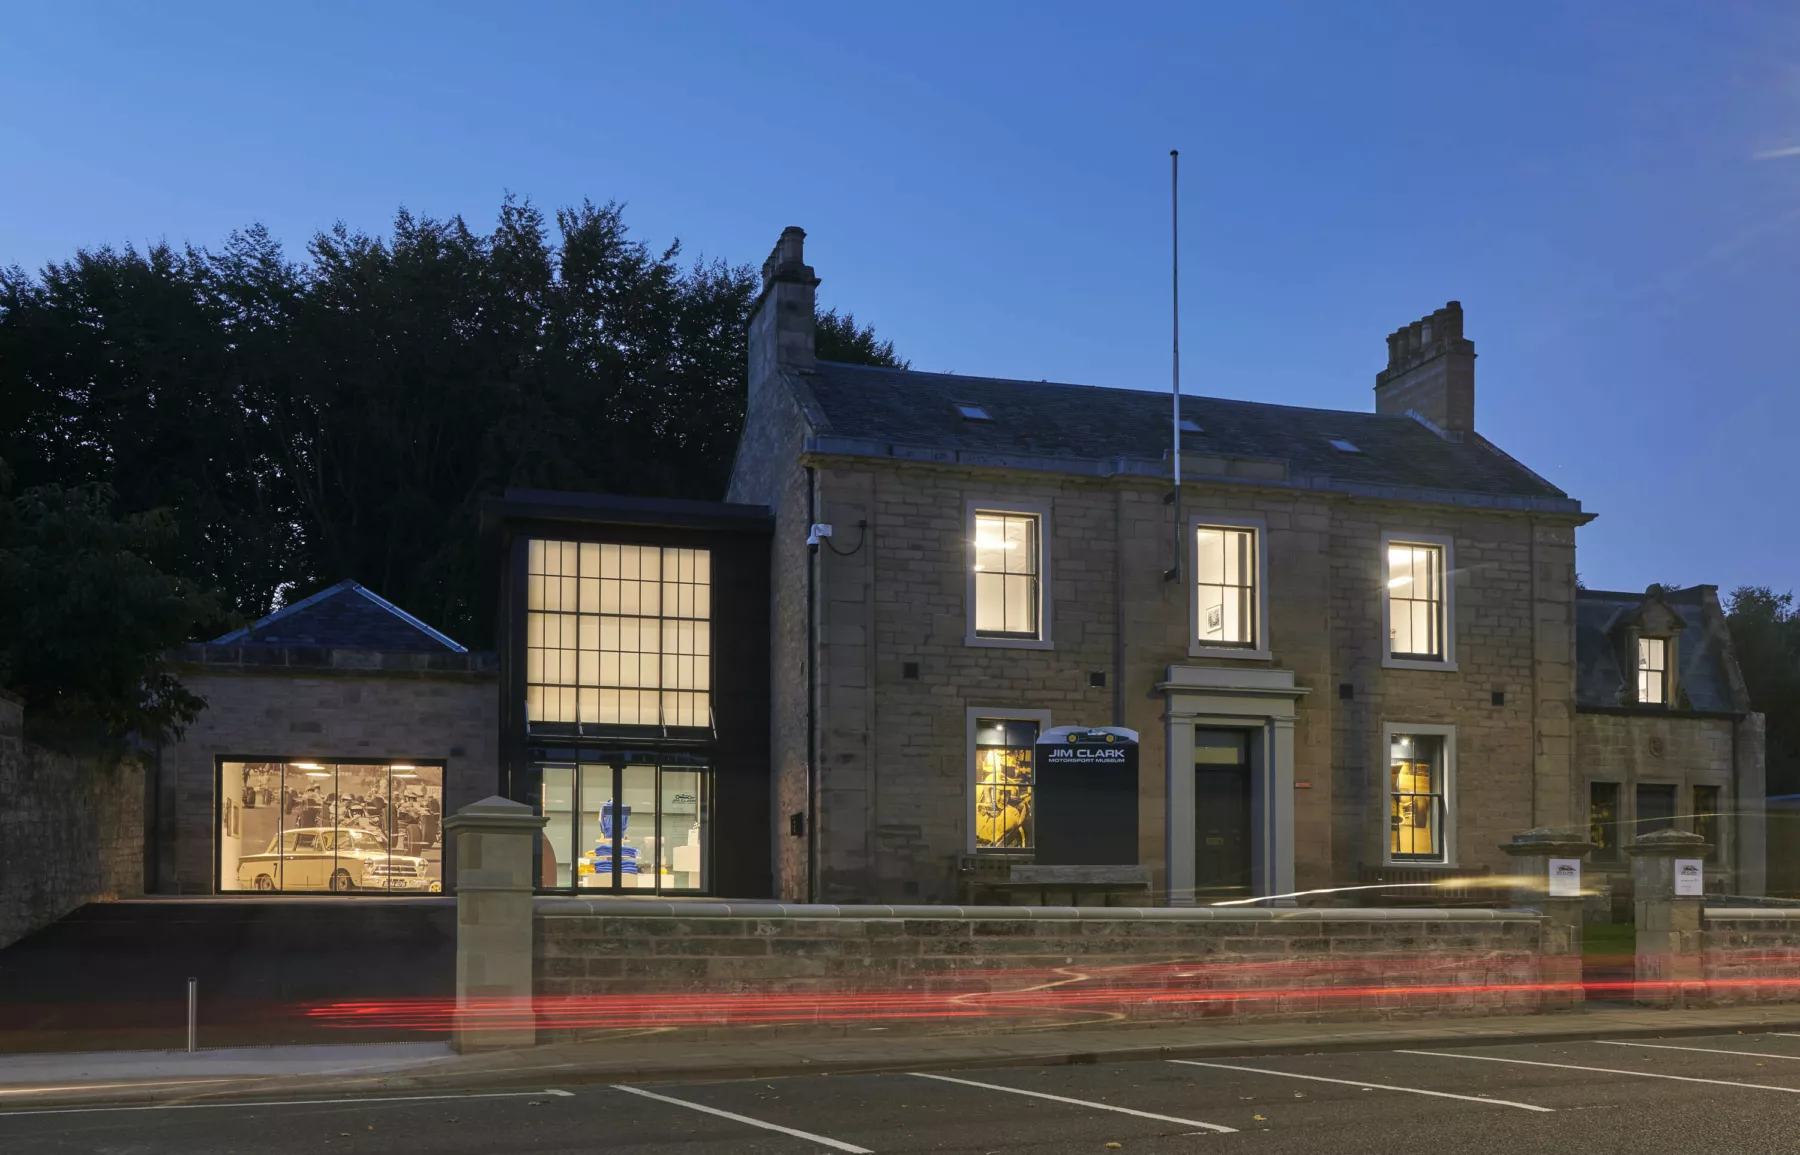 Exterior, nighttime view of the Jim Clark Motorsport Museum, Duns, Scottish Borders. The building is lit up within - a sandstone Georgian villa with outbuildings now linked via a contemporary, double height construction. Tail lights trail across the image, a car has passed by.